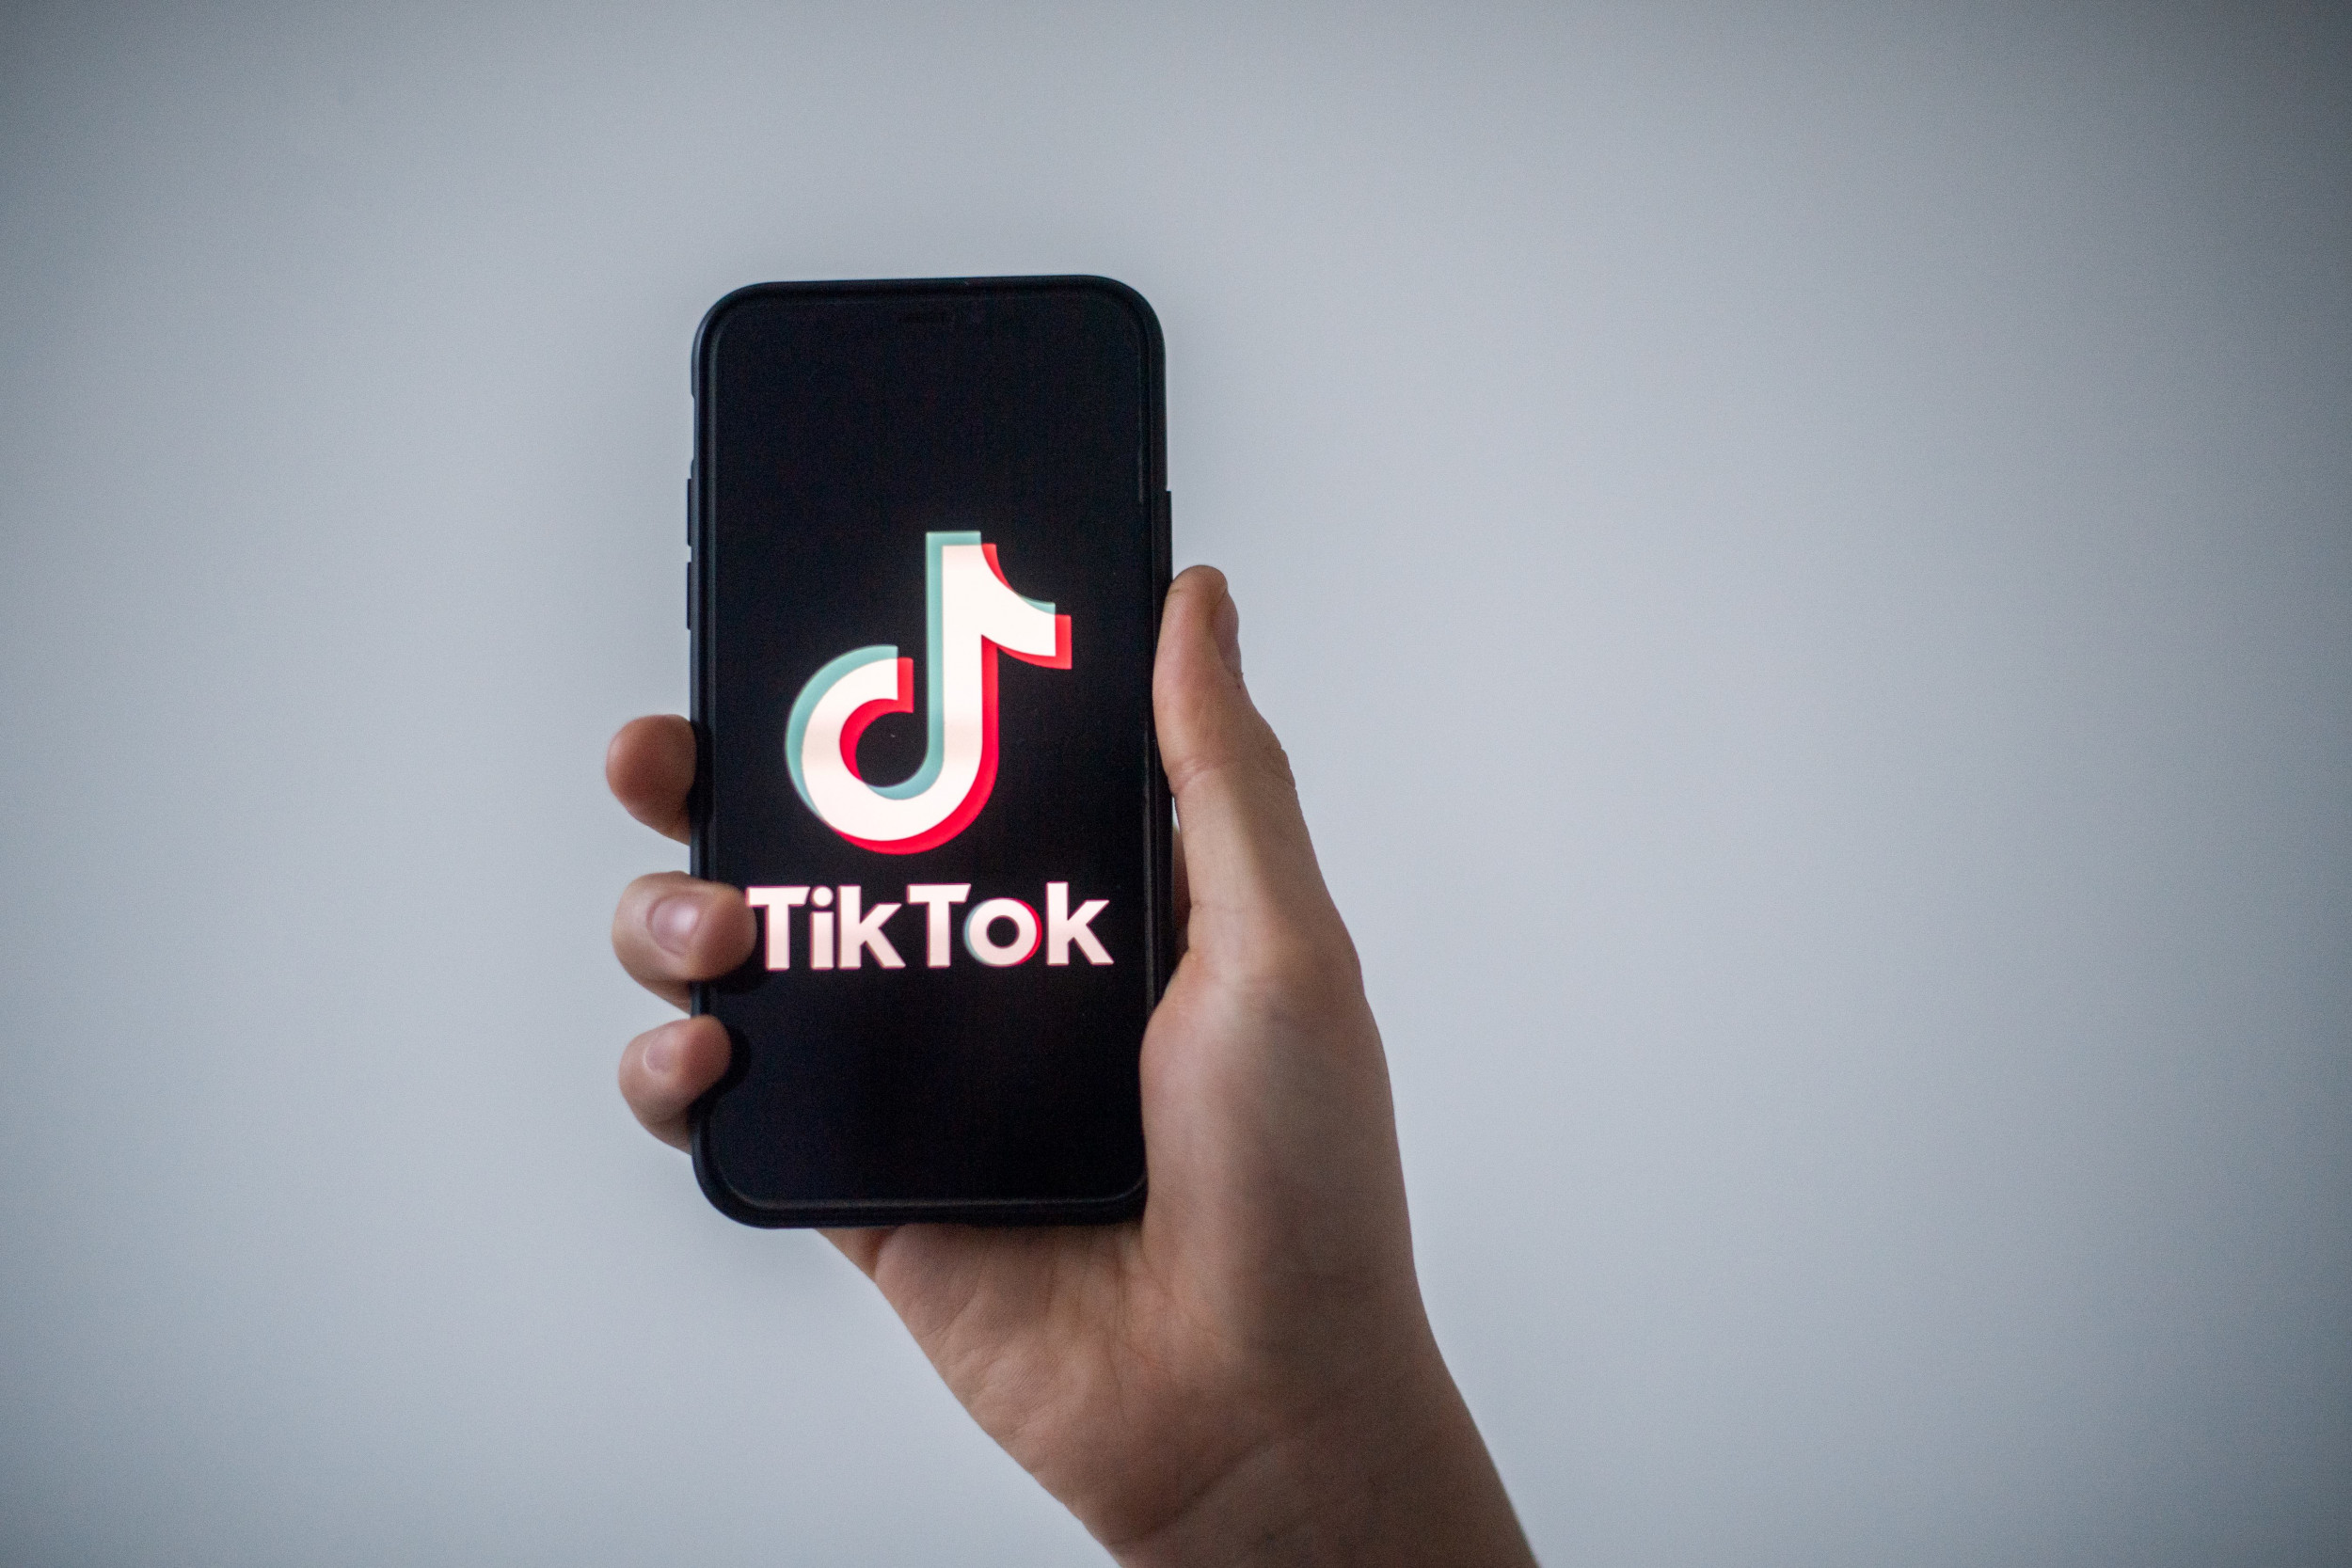 Tiktok Launches In App Shopping In Partnership With Shopify